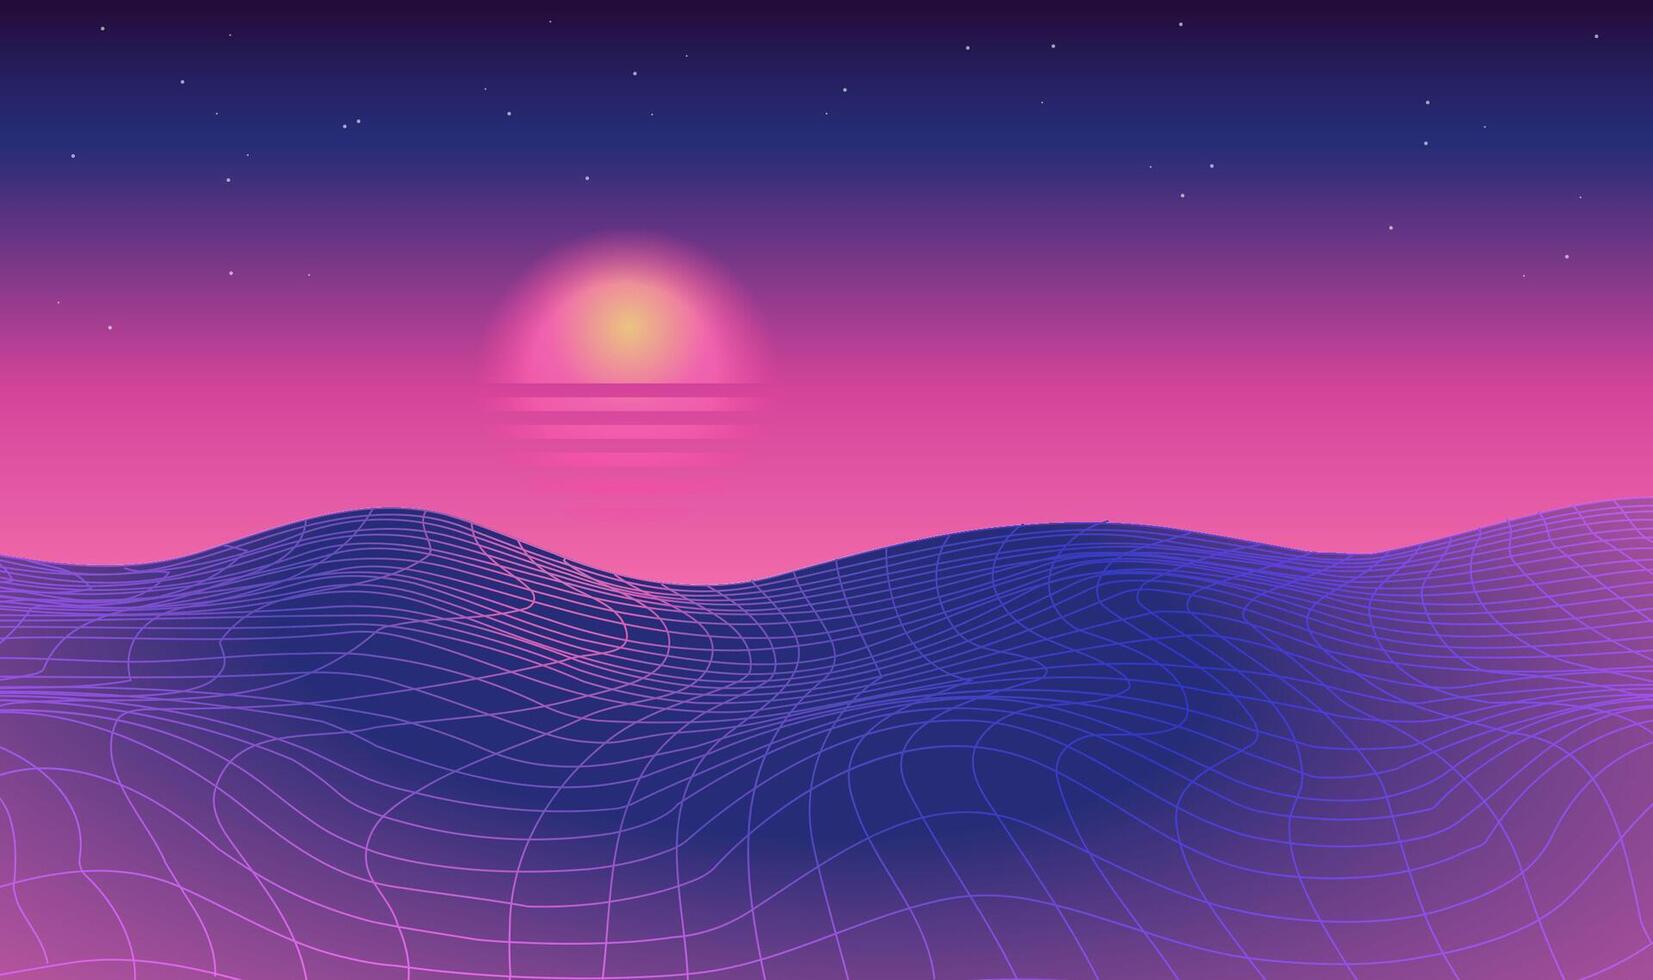 Neon checkered grid purple landscape and pink sunset with old 80s arcade game style for New Retro Wave party banner. 1980s backdrop. Vector vintage illustration.